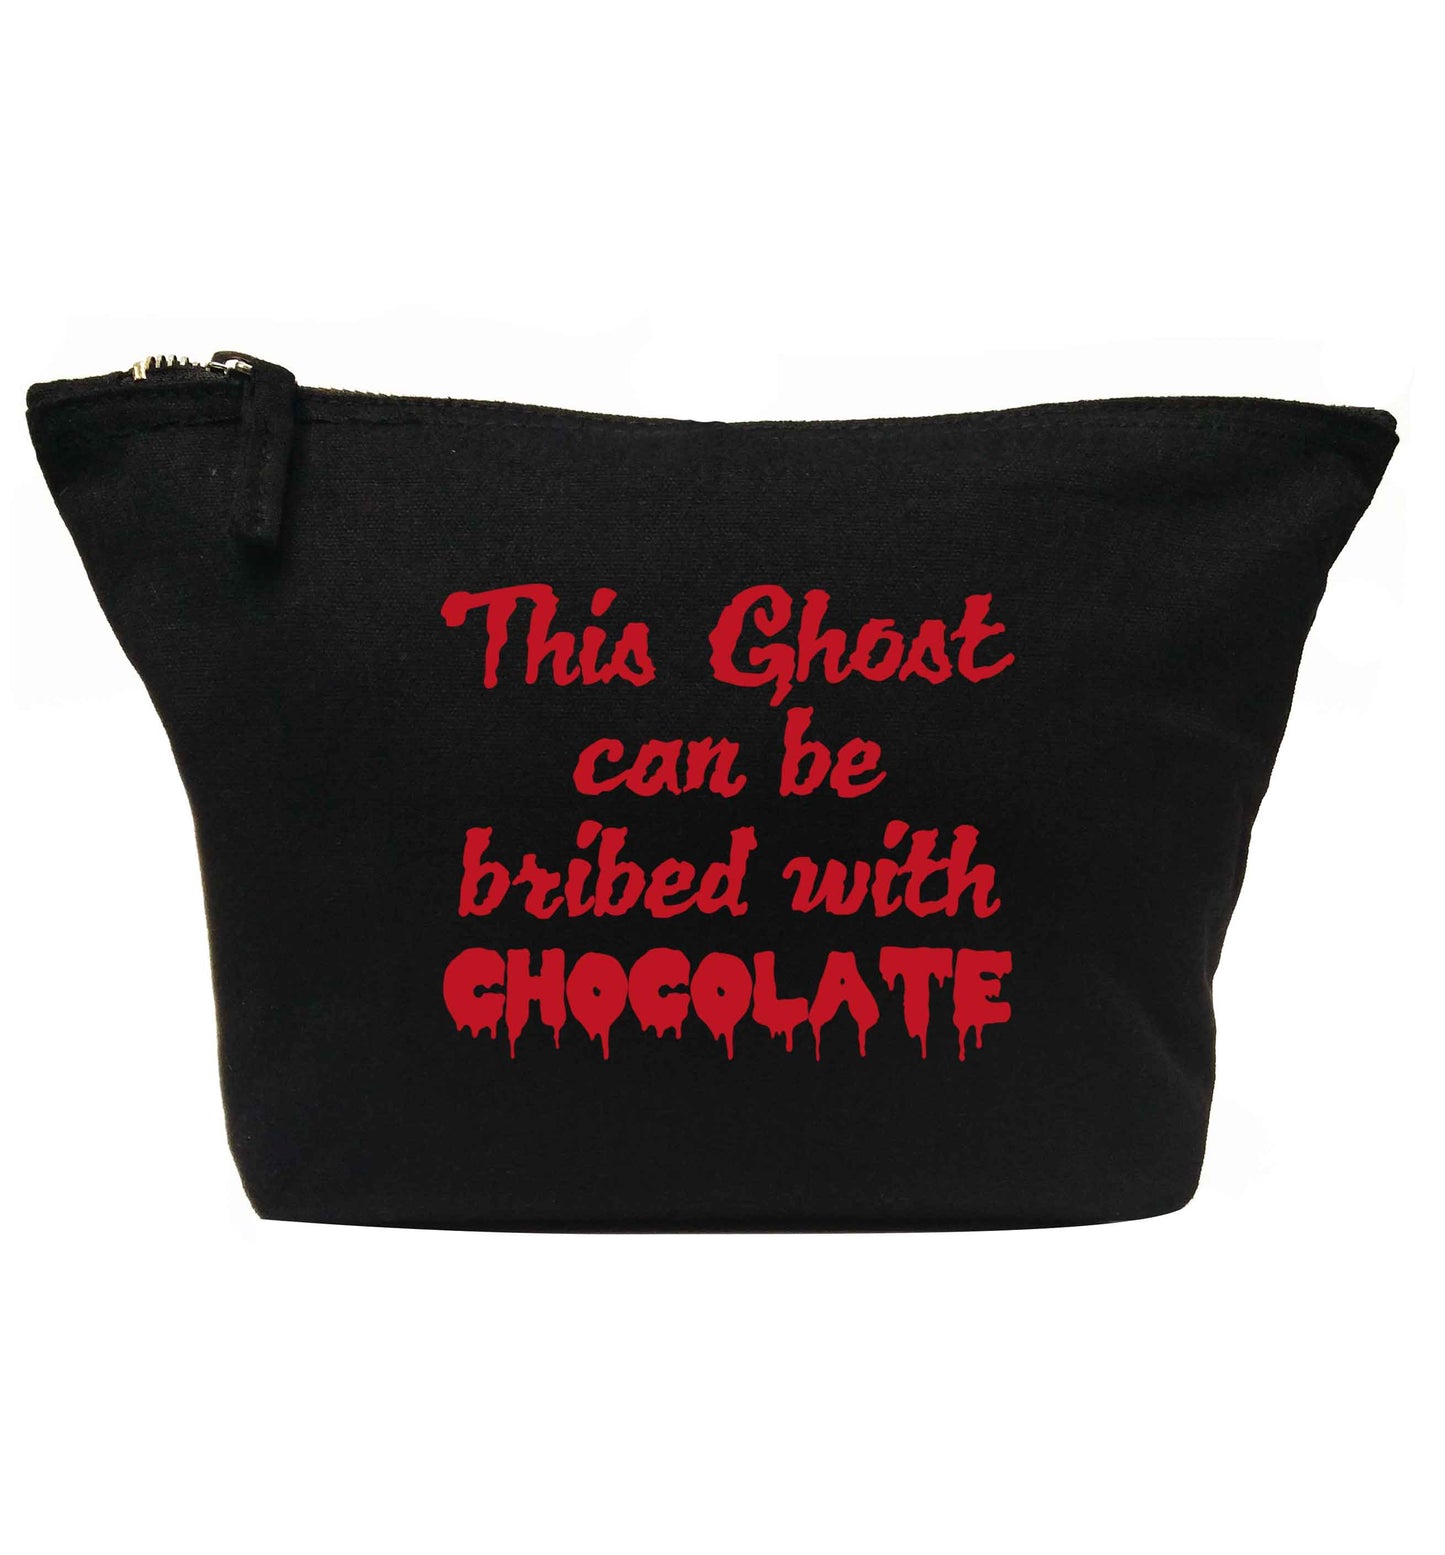 This ghost can be bribed with chocolate | Makeup / wash bag